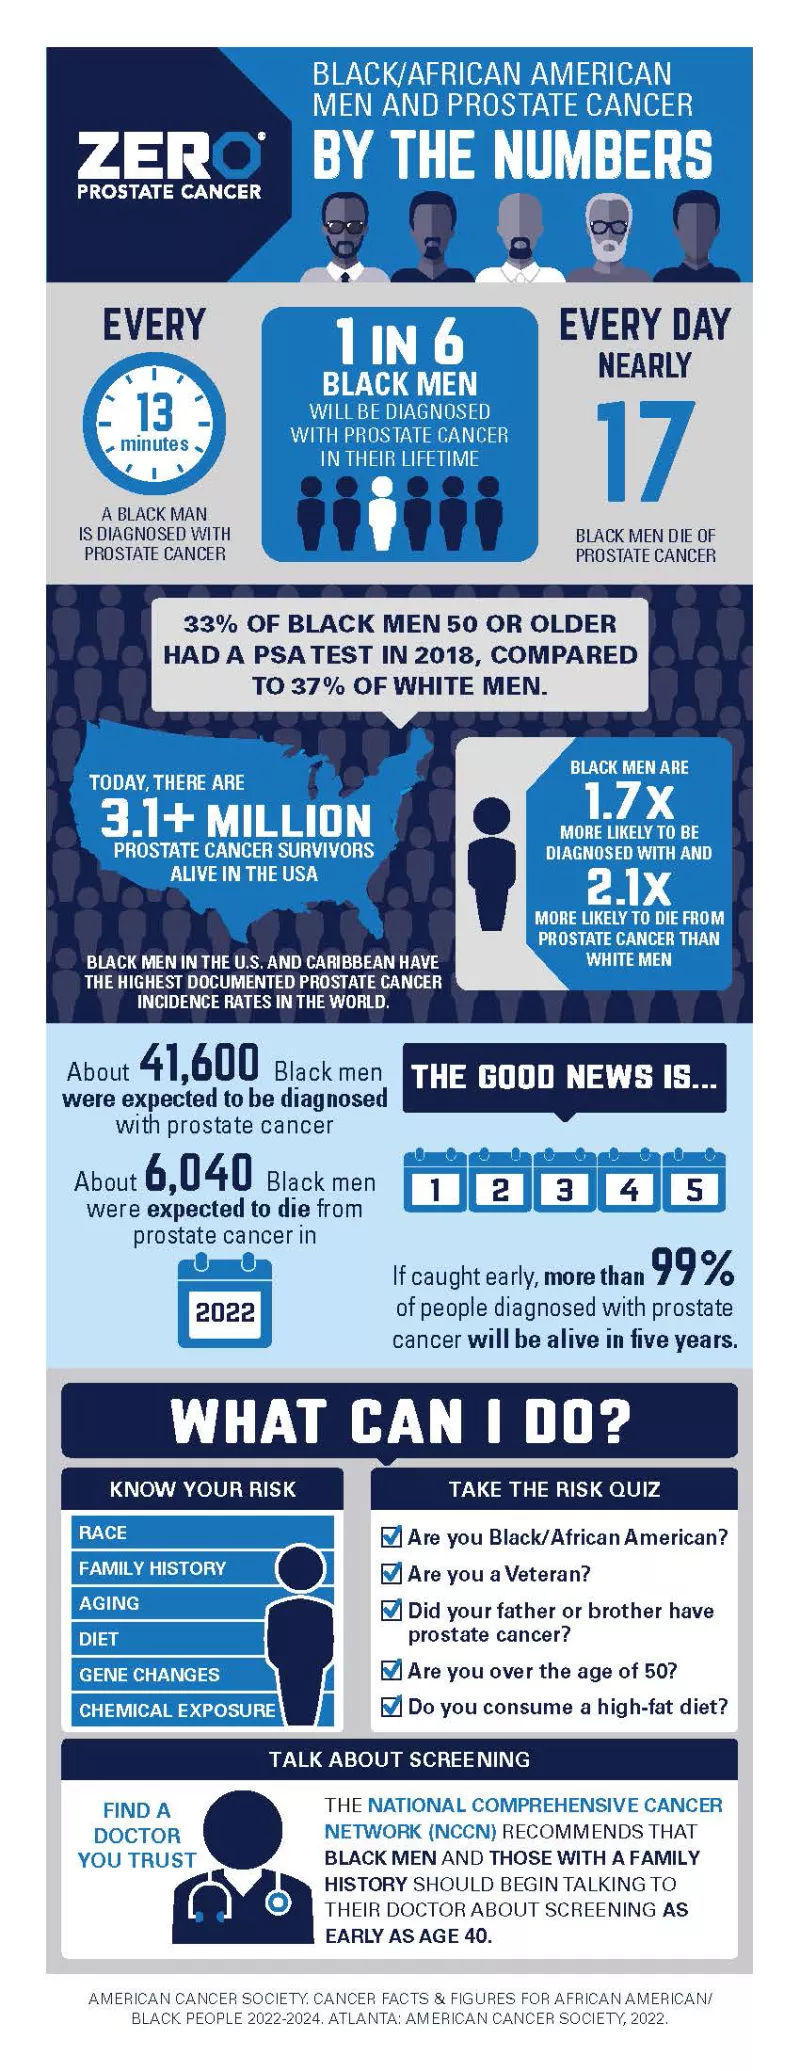 Black Men and Prostate Cancer by the Numbers Infographic page 1